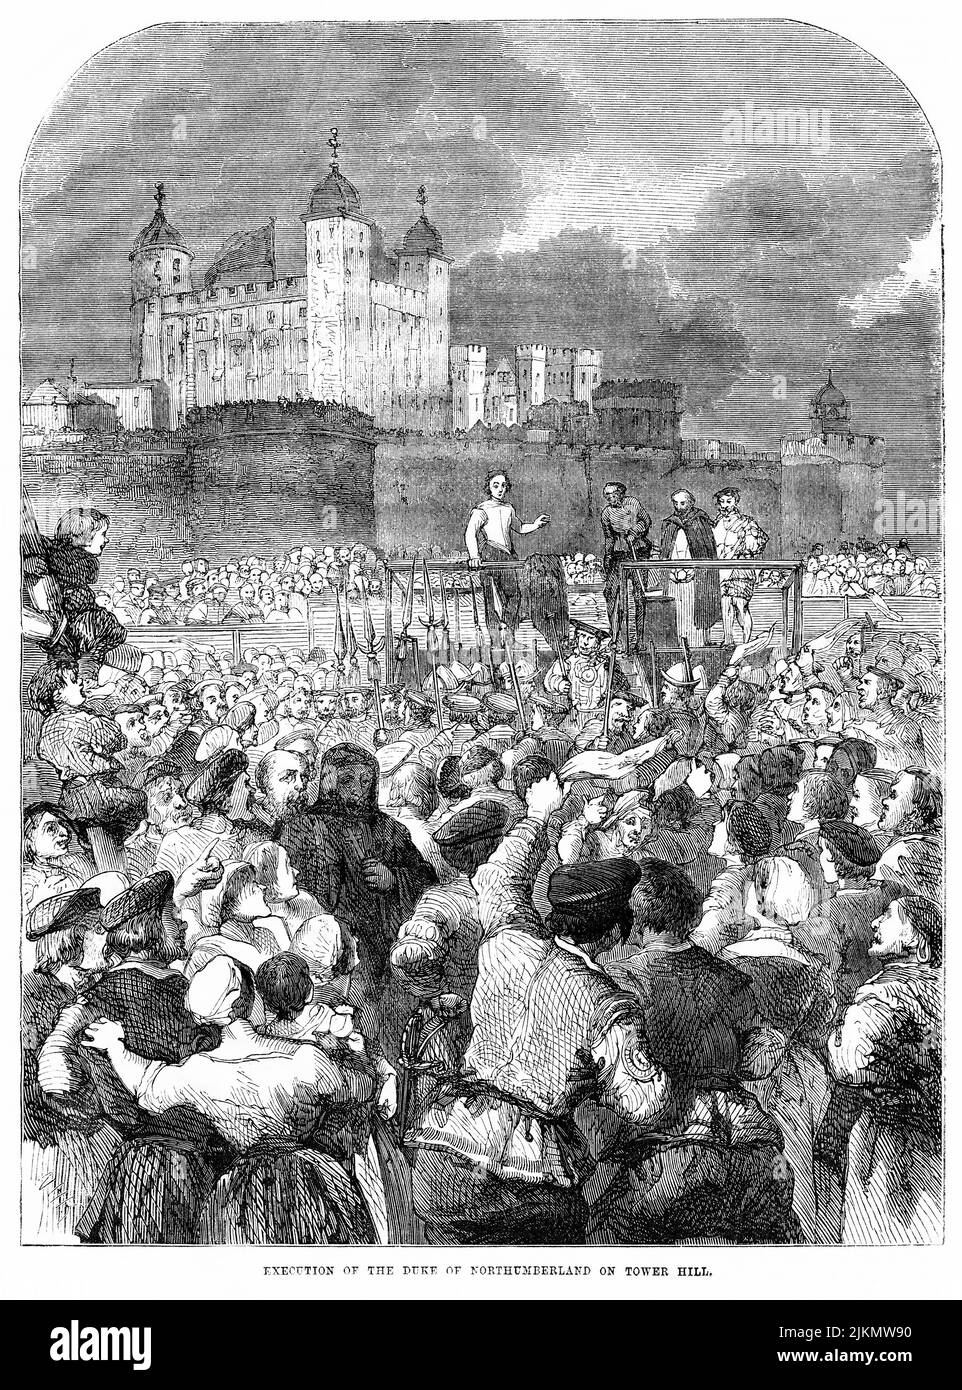 Execution of the Duke of Northumberland on Tower Hill, Illustration from the Book, 'John Cassel’s Illustrated History of England, Volume II', text by William Howitt, Cassell, Petter, and Galpin, London, 1858 Stock Photo